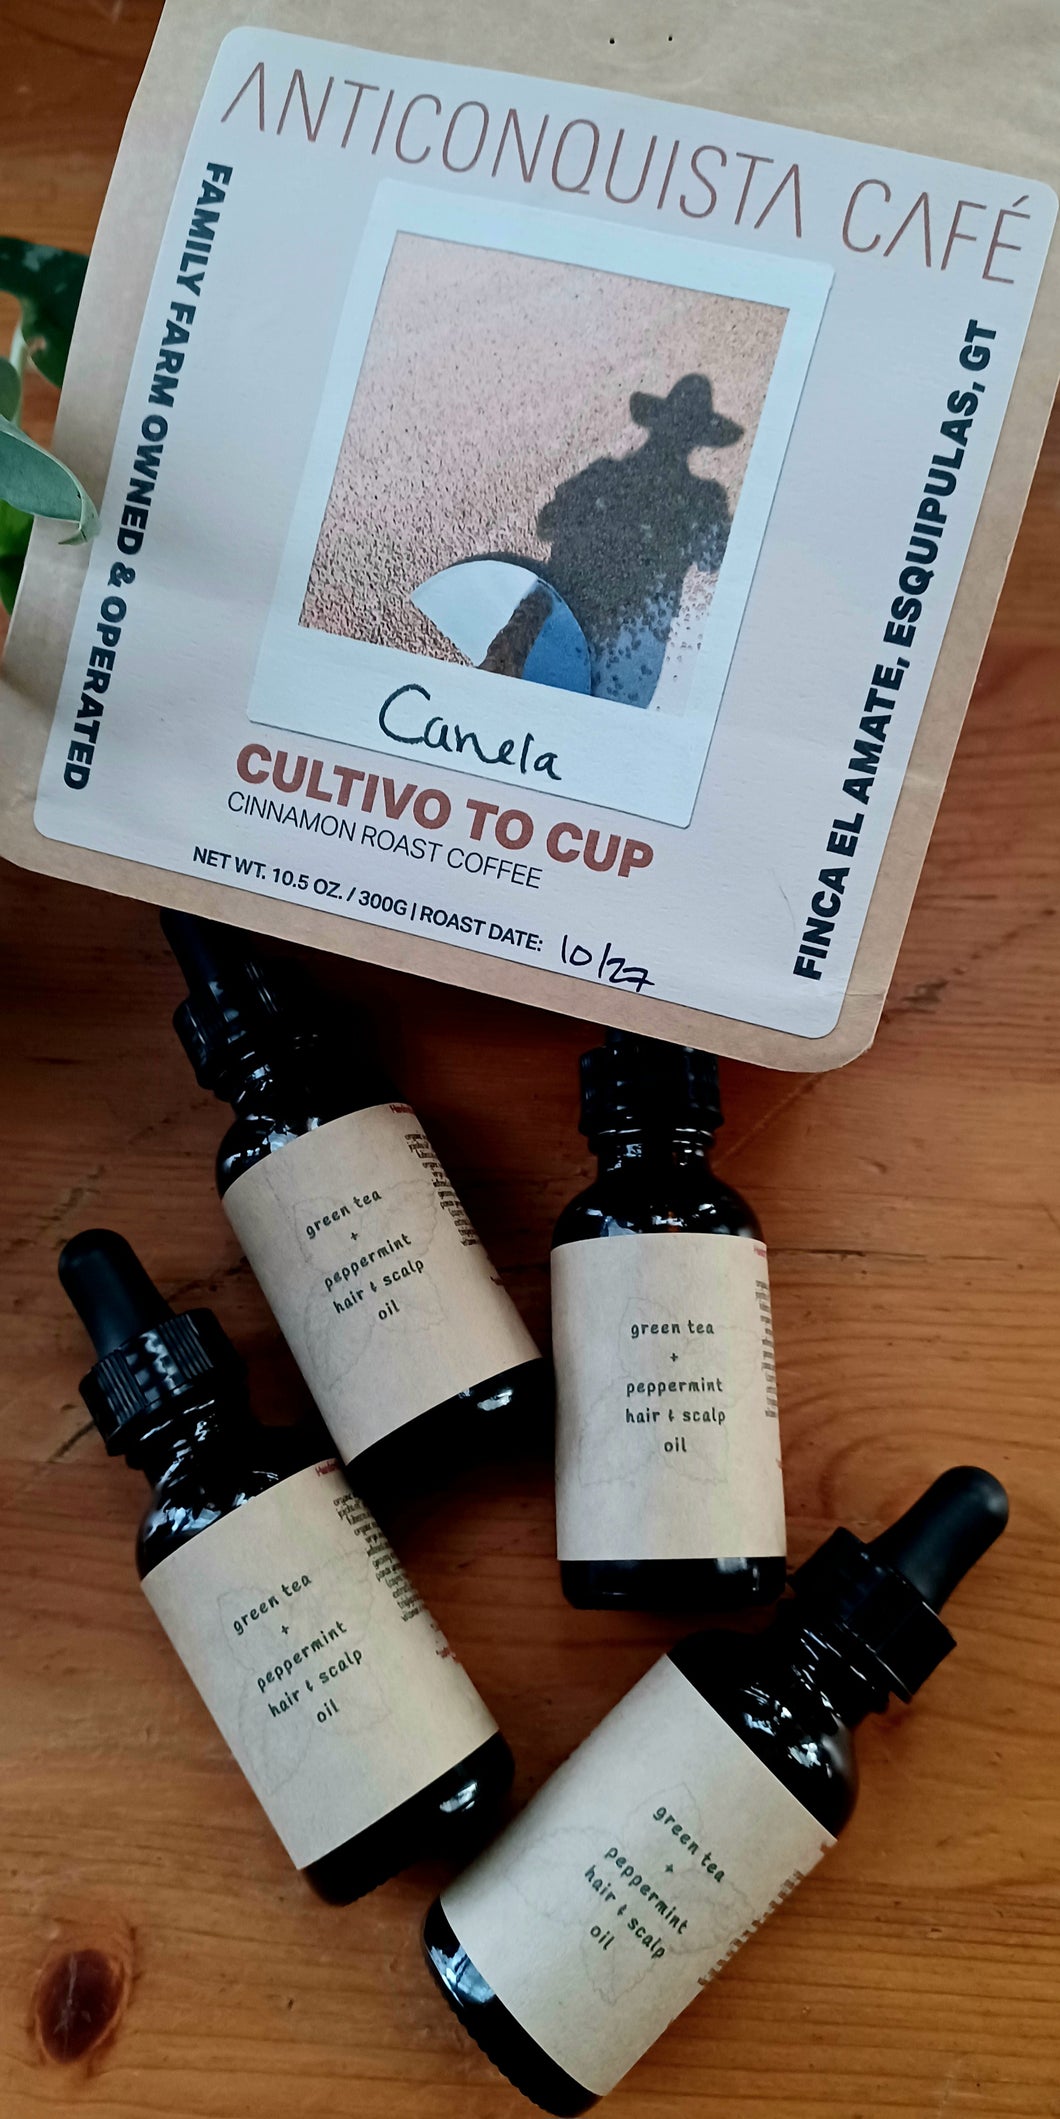 Green Tea + Peppermint Hair & Scalp Oil - Infused with coffee beans from Anticonquista Café